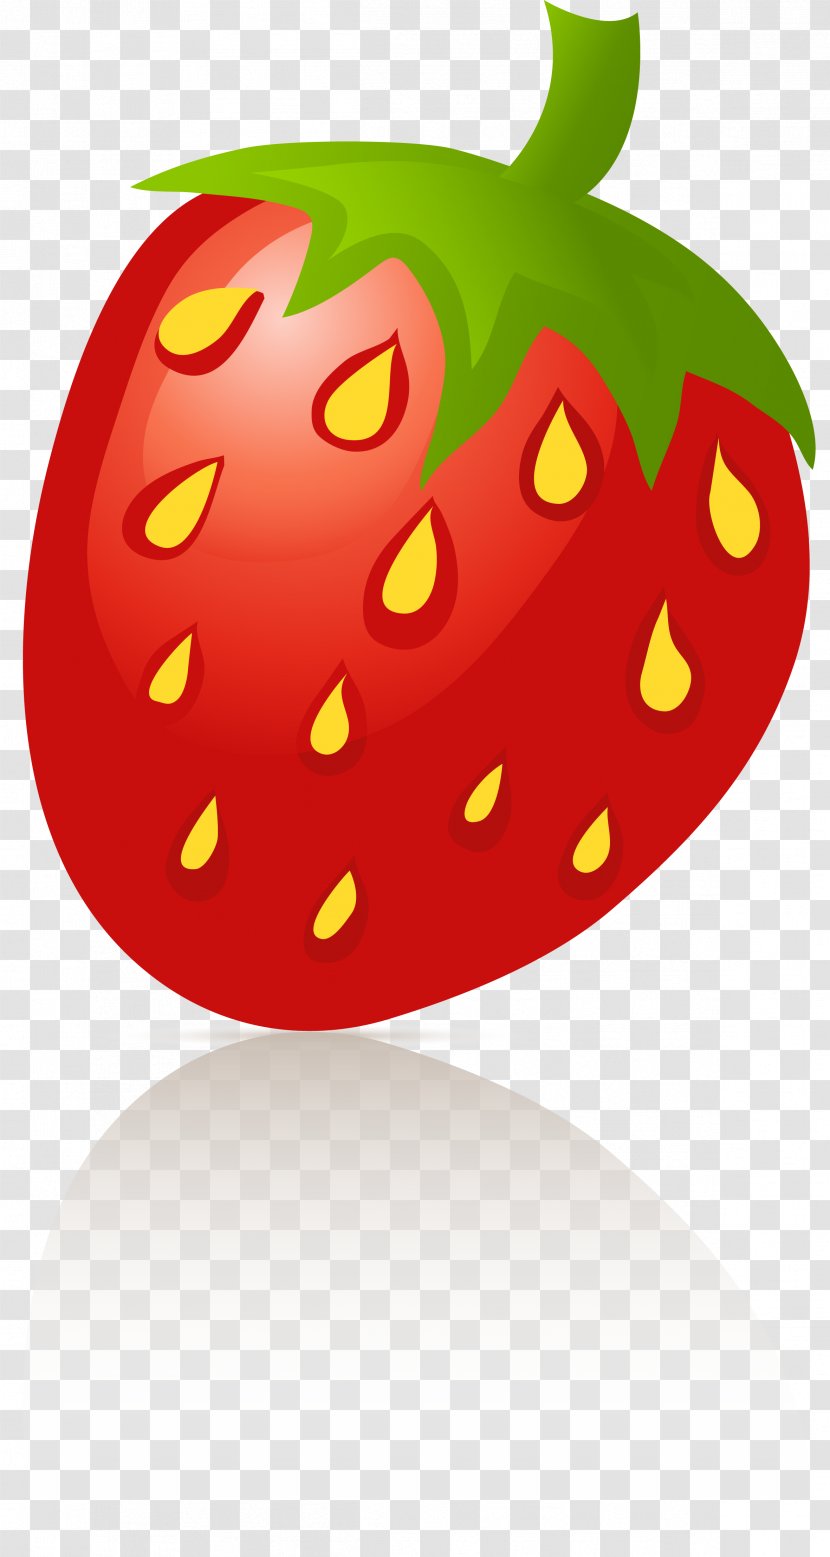 Strawberry Sigel Bell Pepper Clip Art - Potato And Tomato Genus - Boards Clipart Transparent PNG